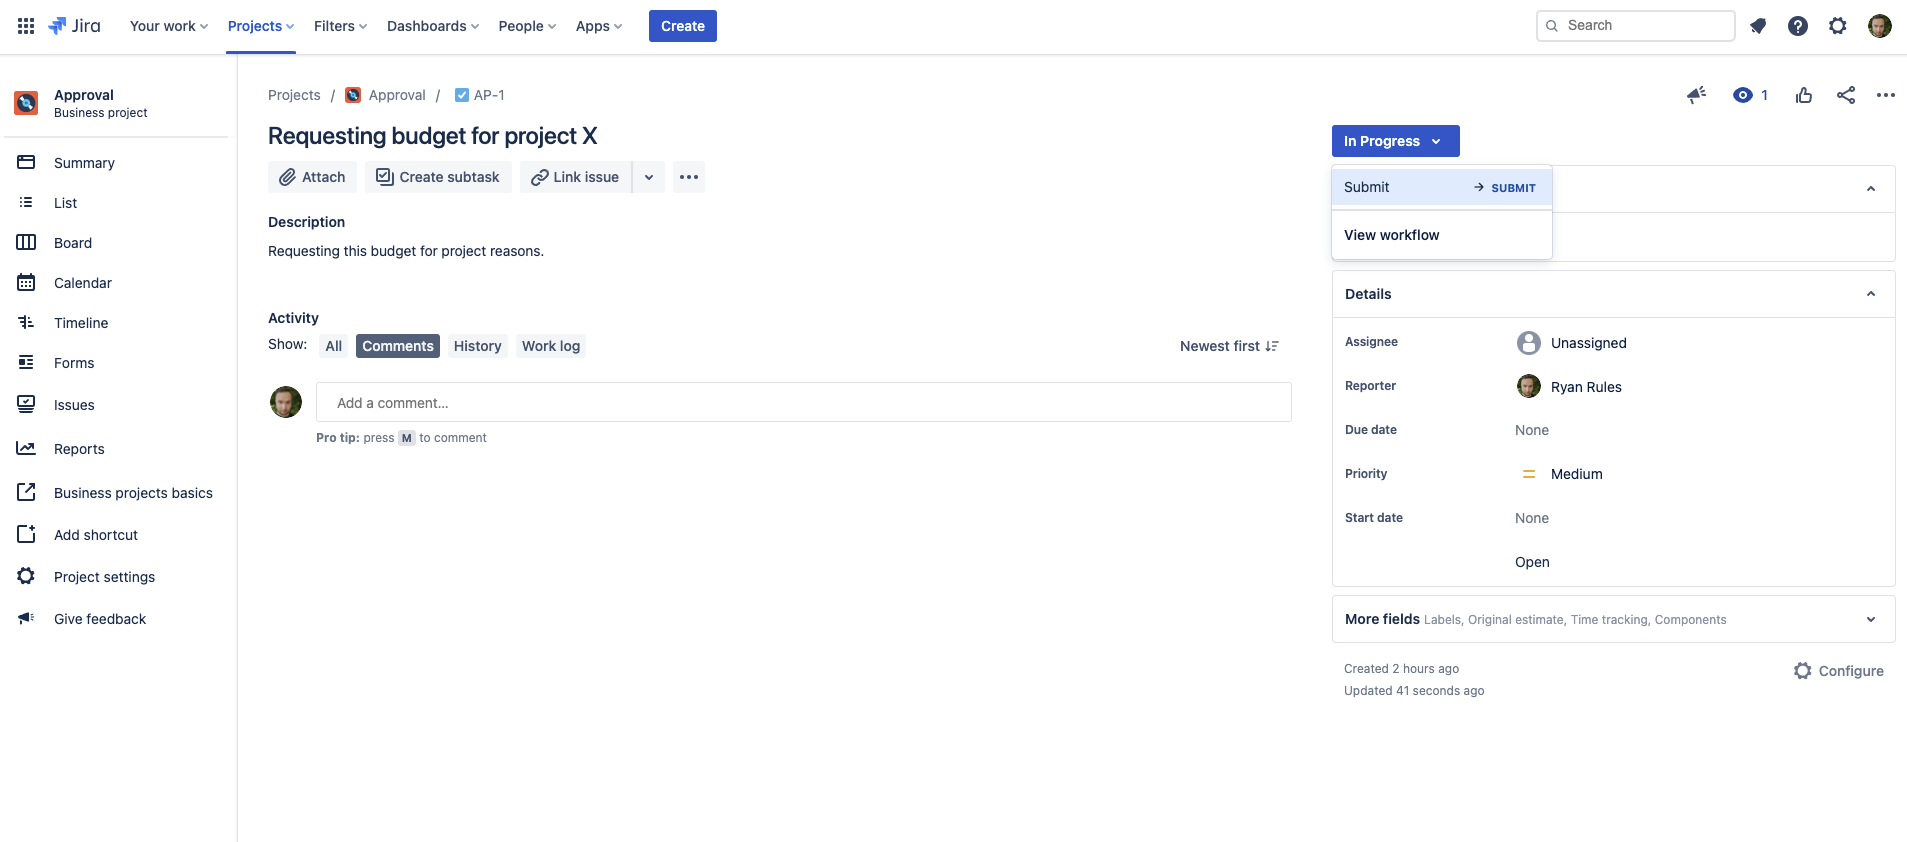 Example Jira issue moved to Submit status